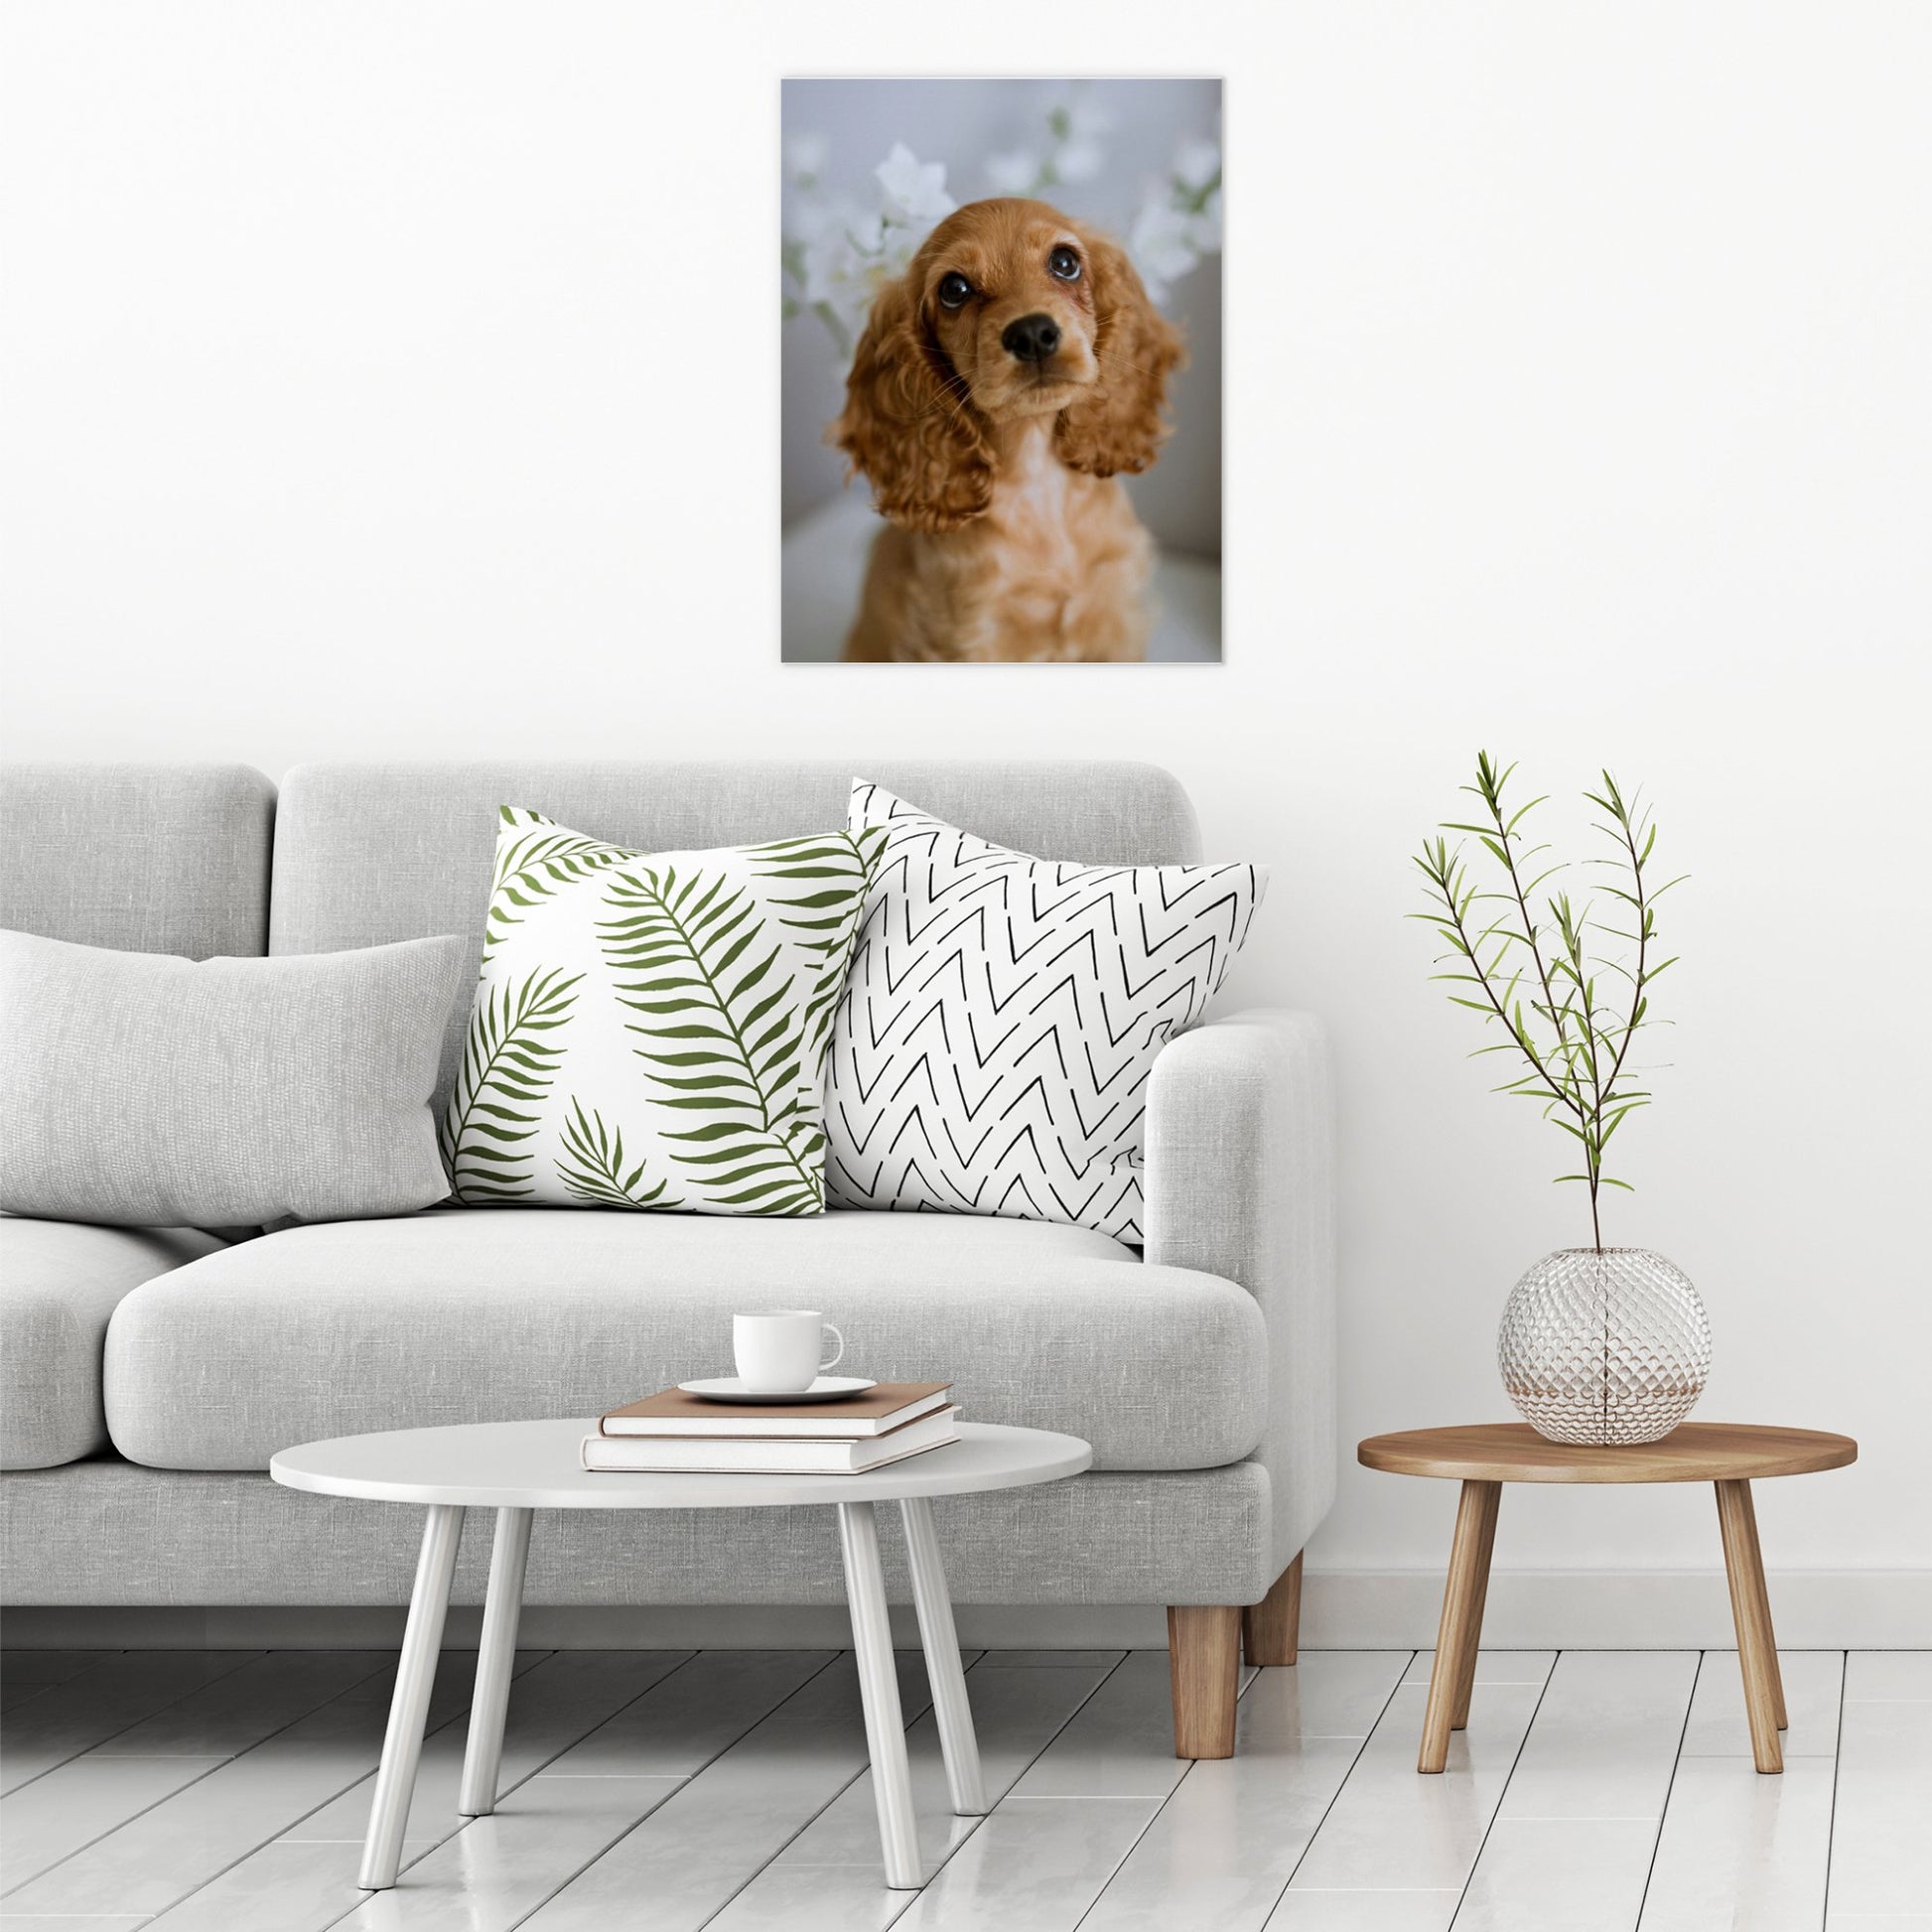 A contemporary modern room view showing a large size metal art poster display plate with printed design of a Cute Golden Cocker Spaniel